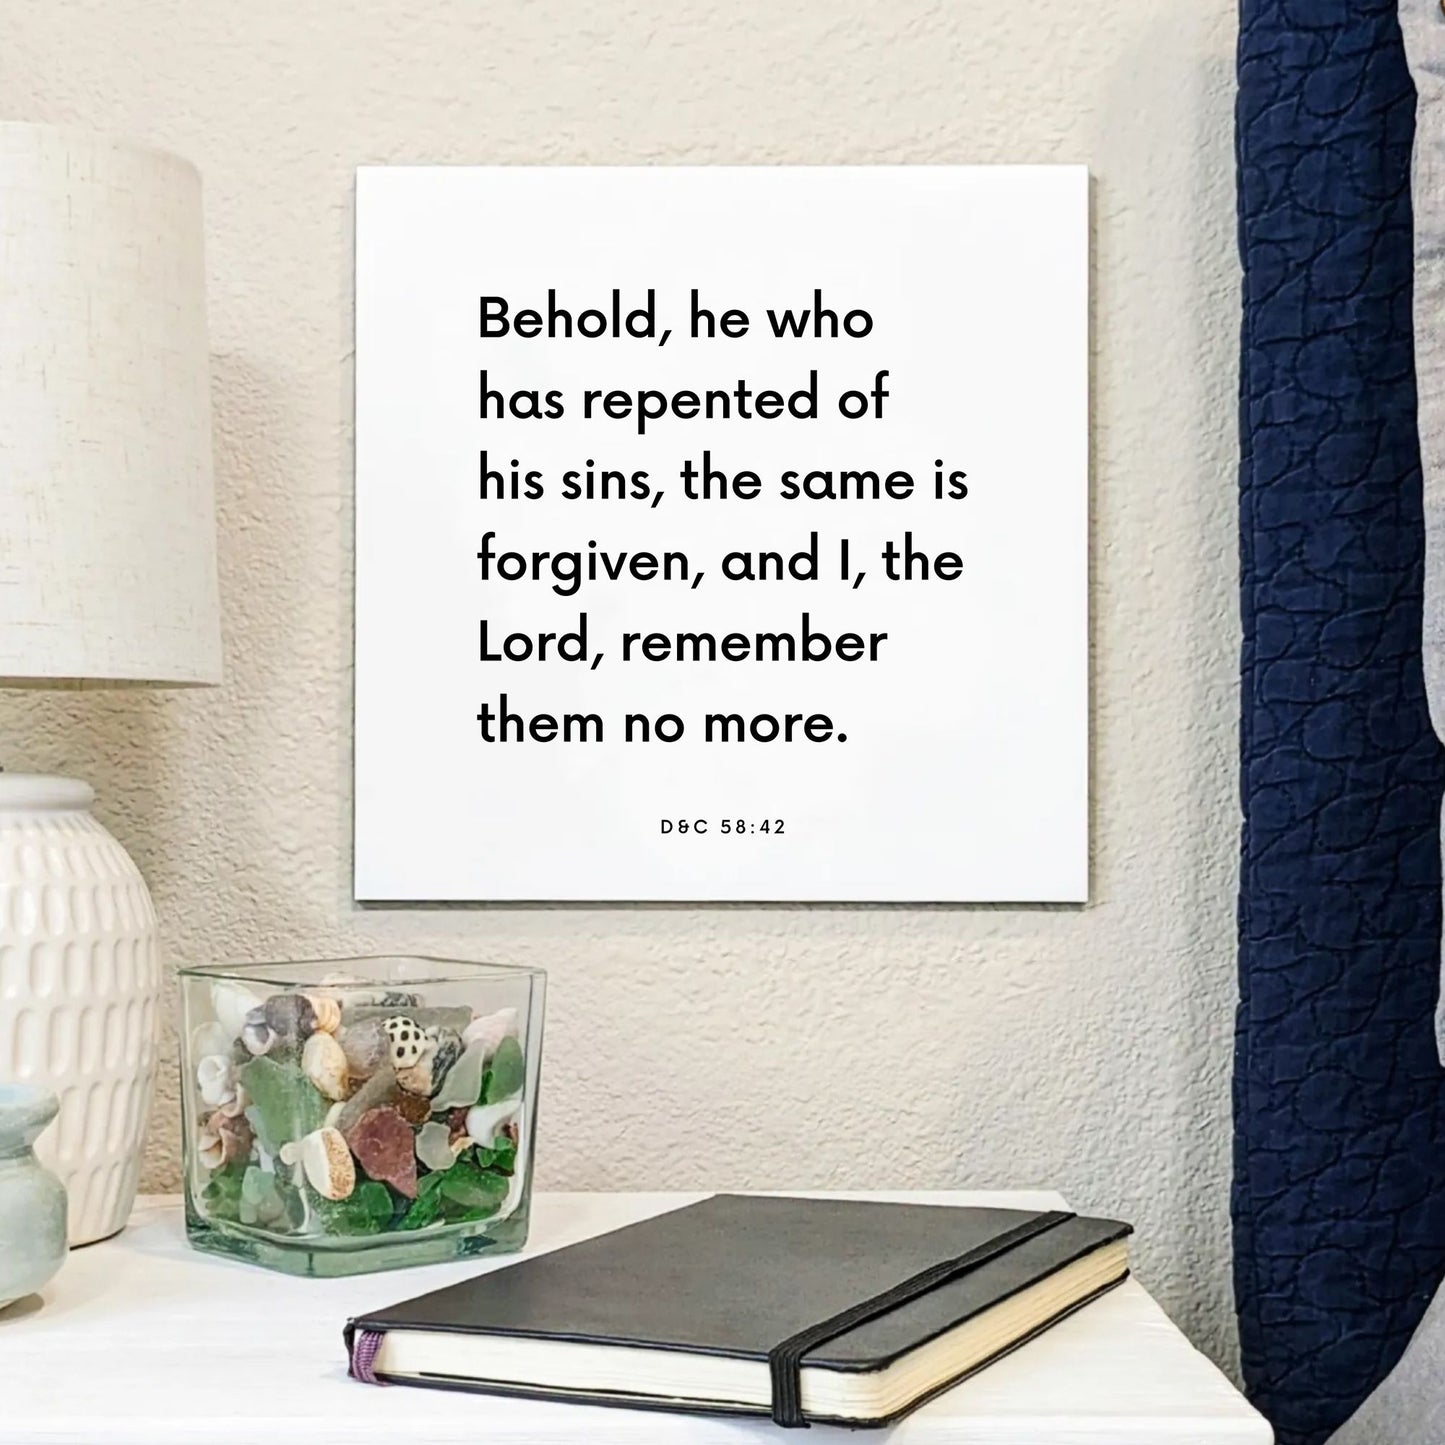 Bedside mouting of the scripture tile for D&C 58:42 - "I, the Lord, remember them no more"